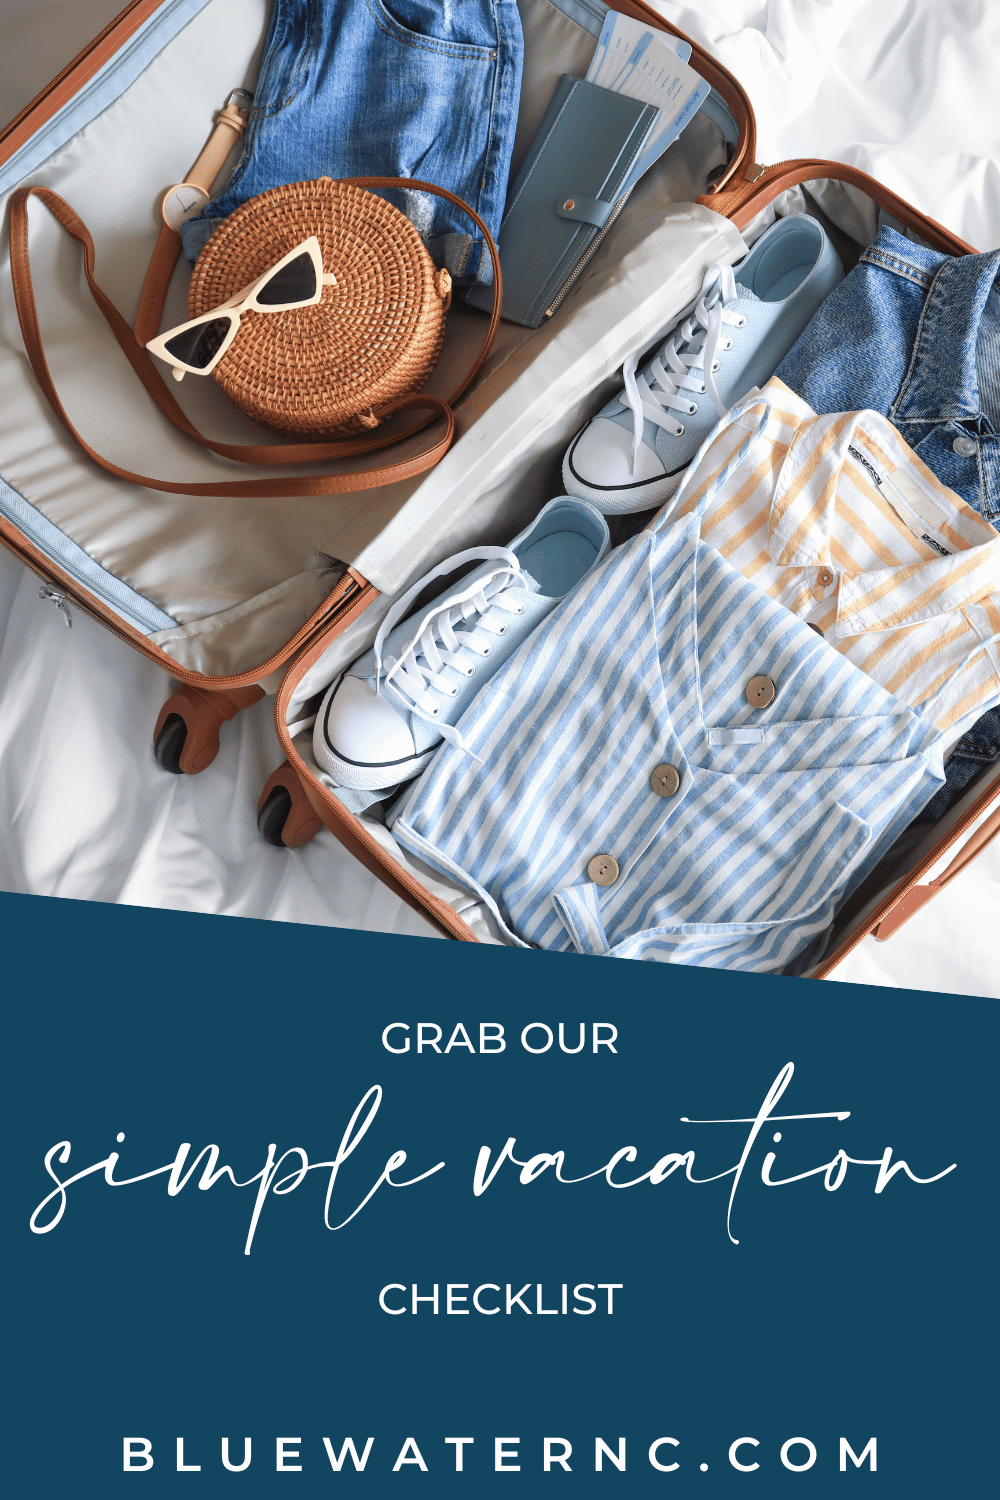 Bluewater Vacation Rentals' Simple Vacation Packing Checklist Pinterest Photo